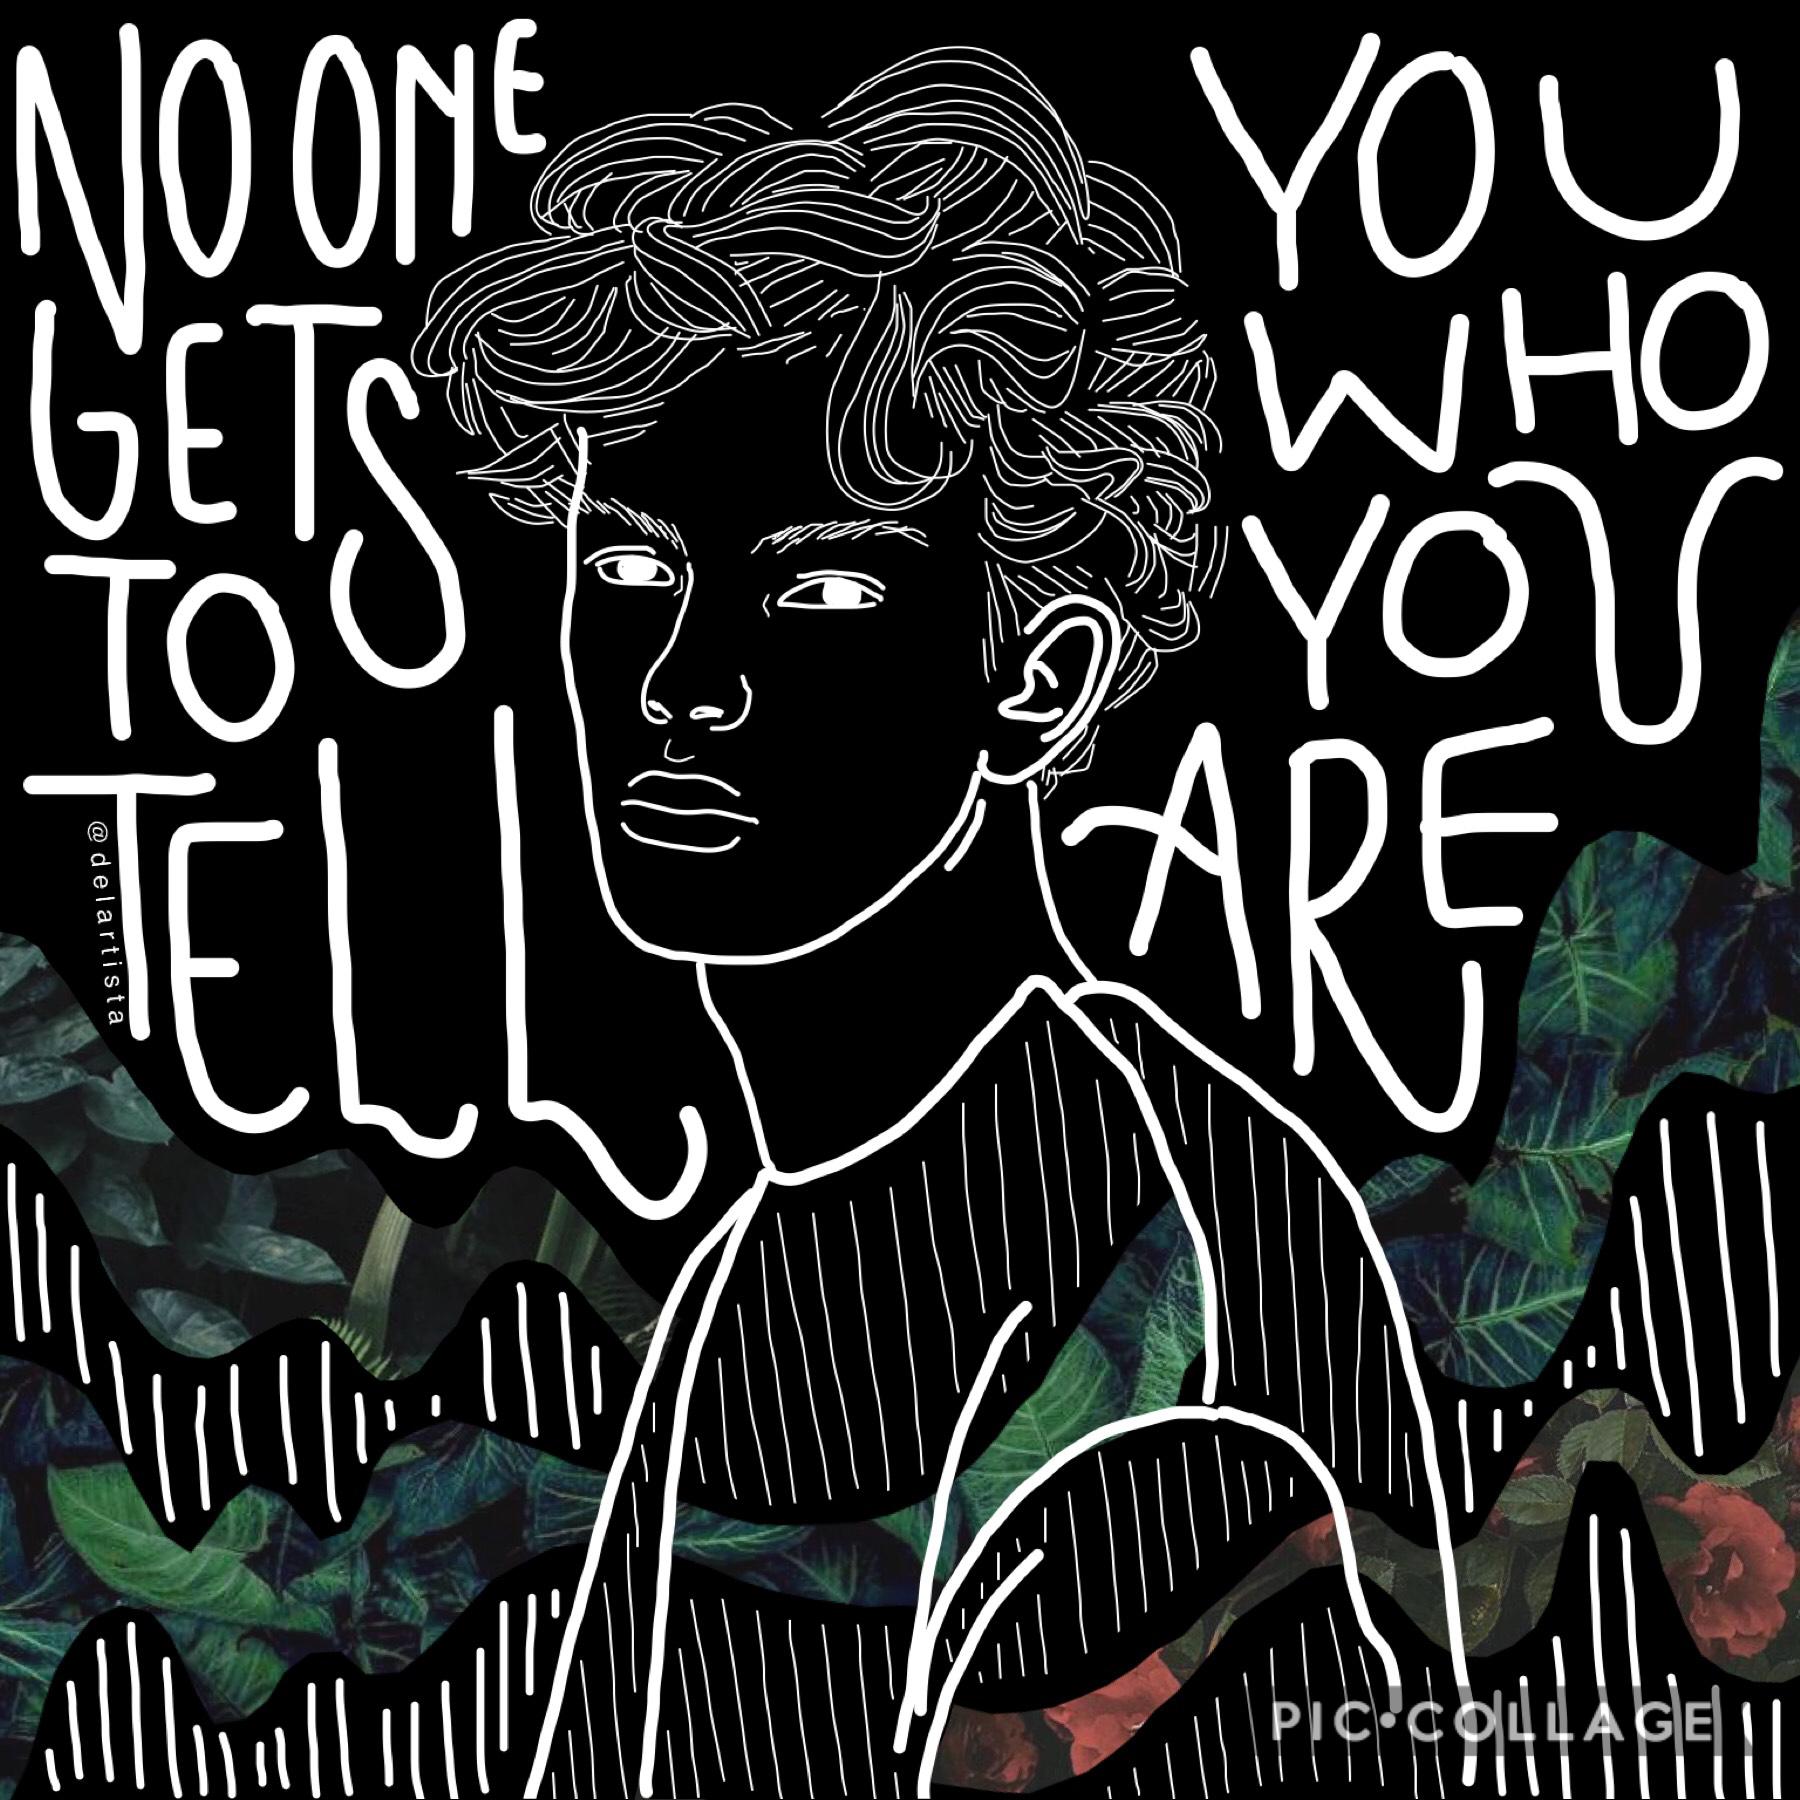 TAP
sorry I haven’t been very active recently. I just haven’t been feeling the best and school has gotten even more stressful. 
.
“No one gets to tell you who you are”
.
How have you guys been? 